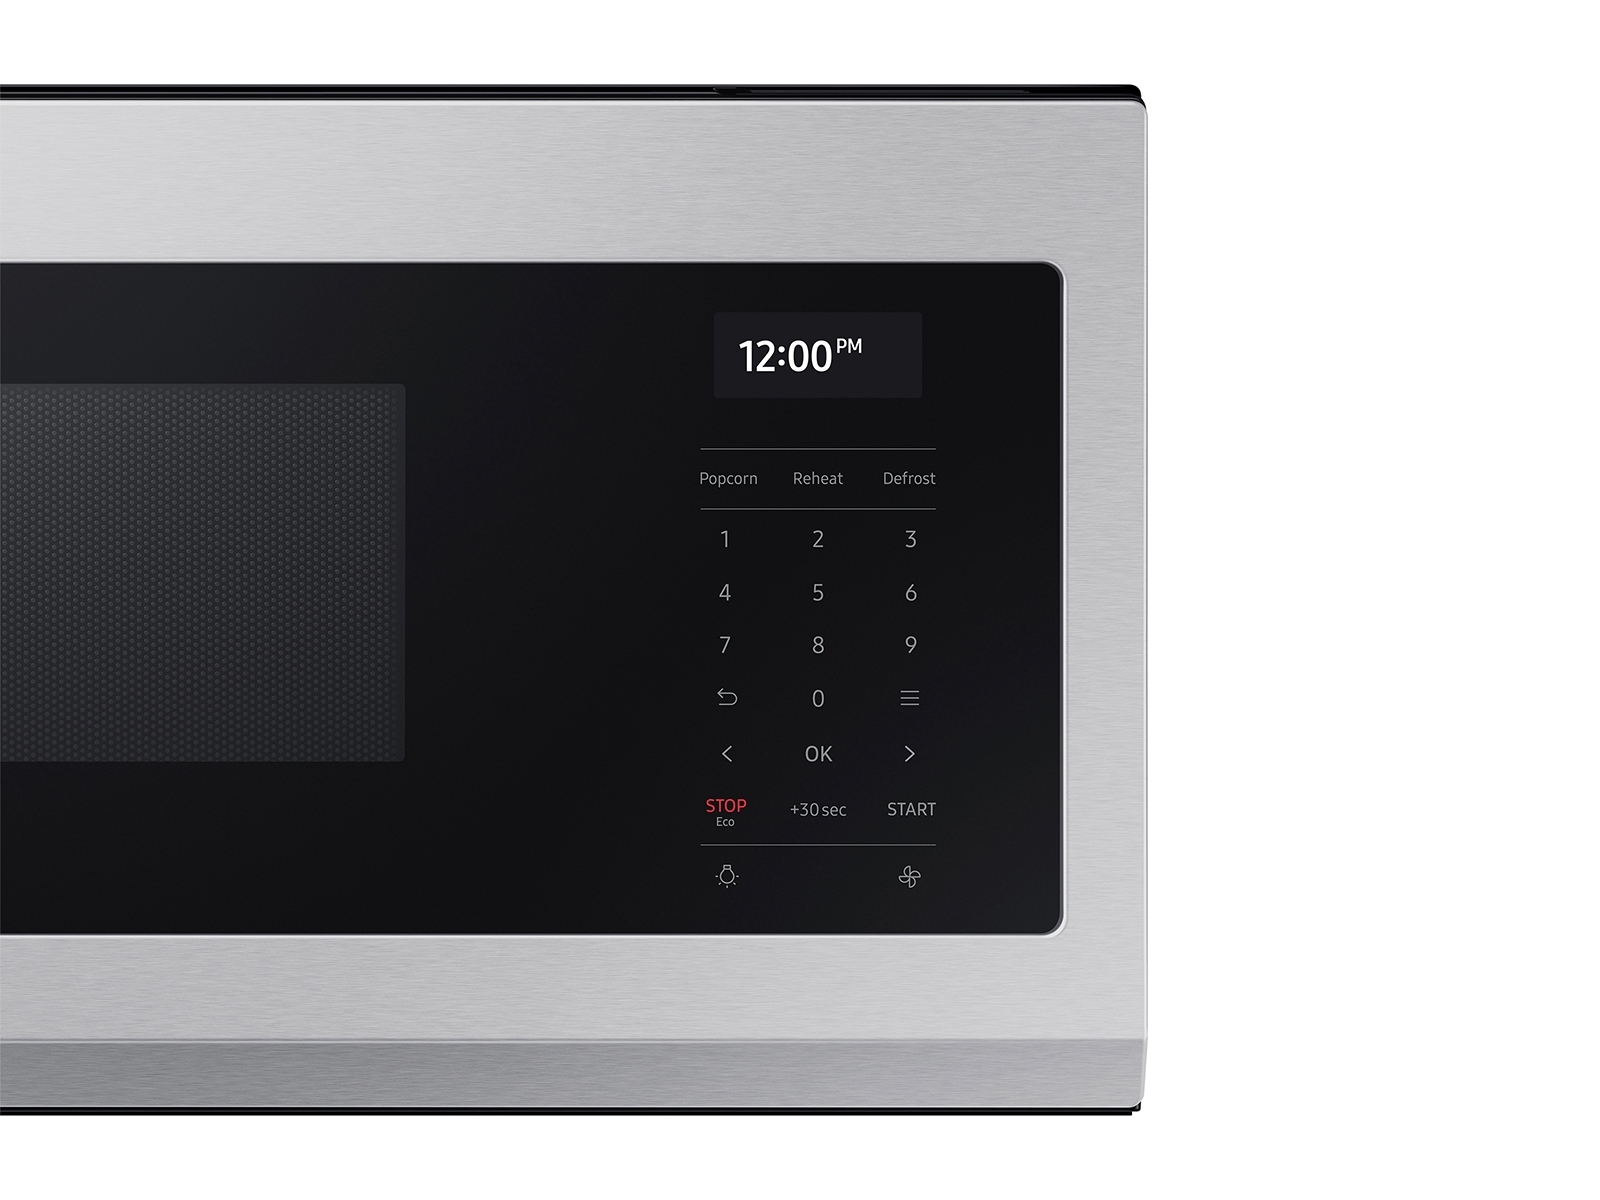 Thumbnail image of 1.1 cu. ft. Smart SLIM Over-the-Range Microwave with 550 CFM Hood Ventilation, Wi-Fi & Voice Control in Stainless Steel